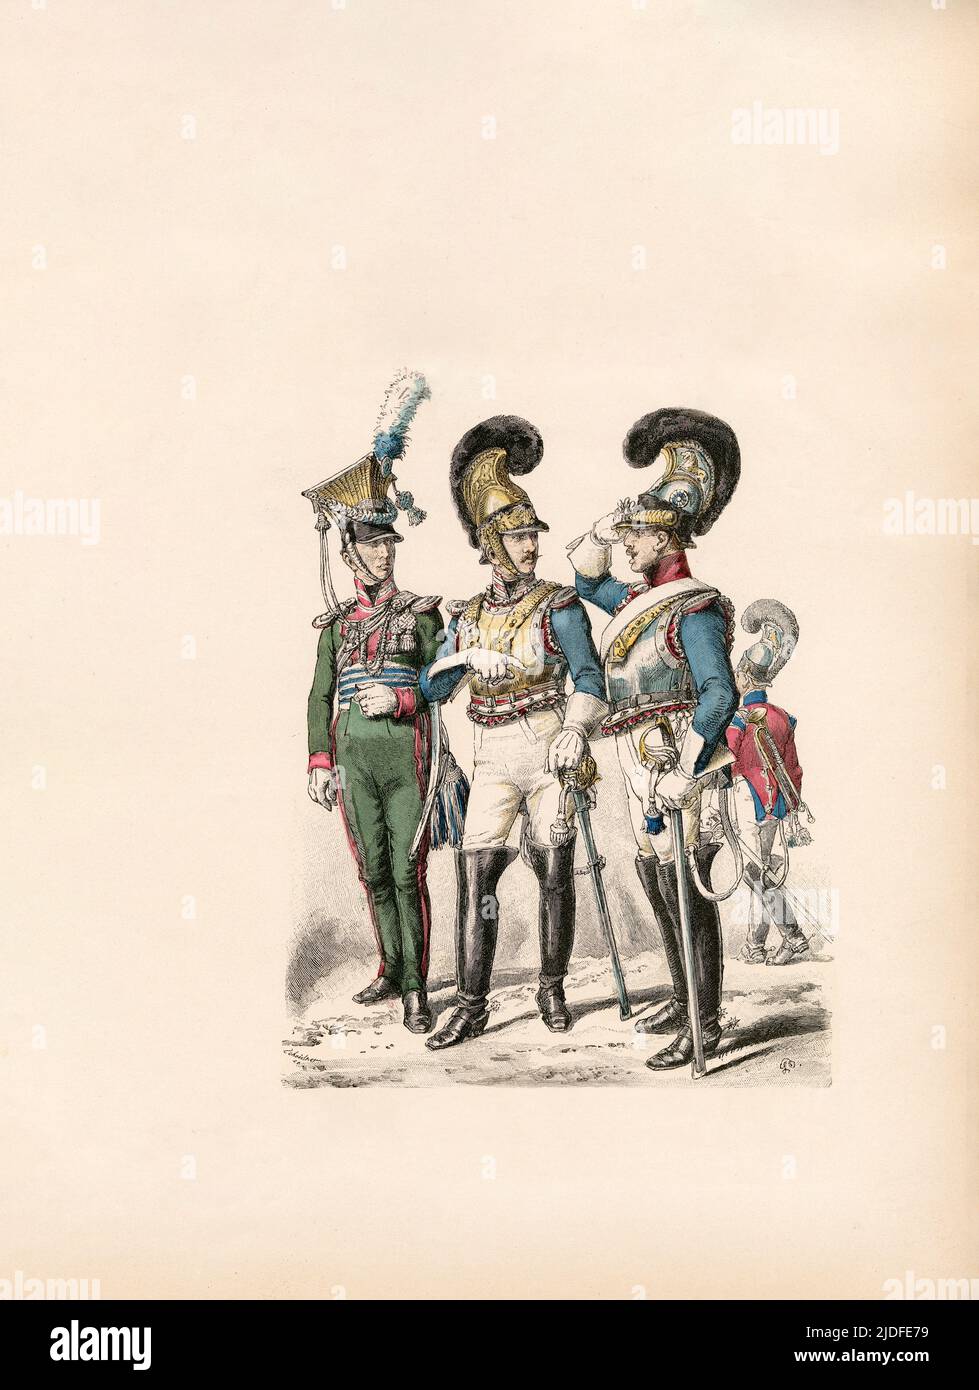 Bavarian Army, Uhlan Officer Garde du Corps, Officer in the Private 1814-1823, Cuirassier Garde du Corps, Trumpeter of Corps in Gala, Illustration, The History of Costume, Braun & Schneider, Munich, Germany, 1861-1880 Stock Photo